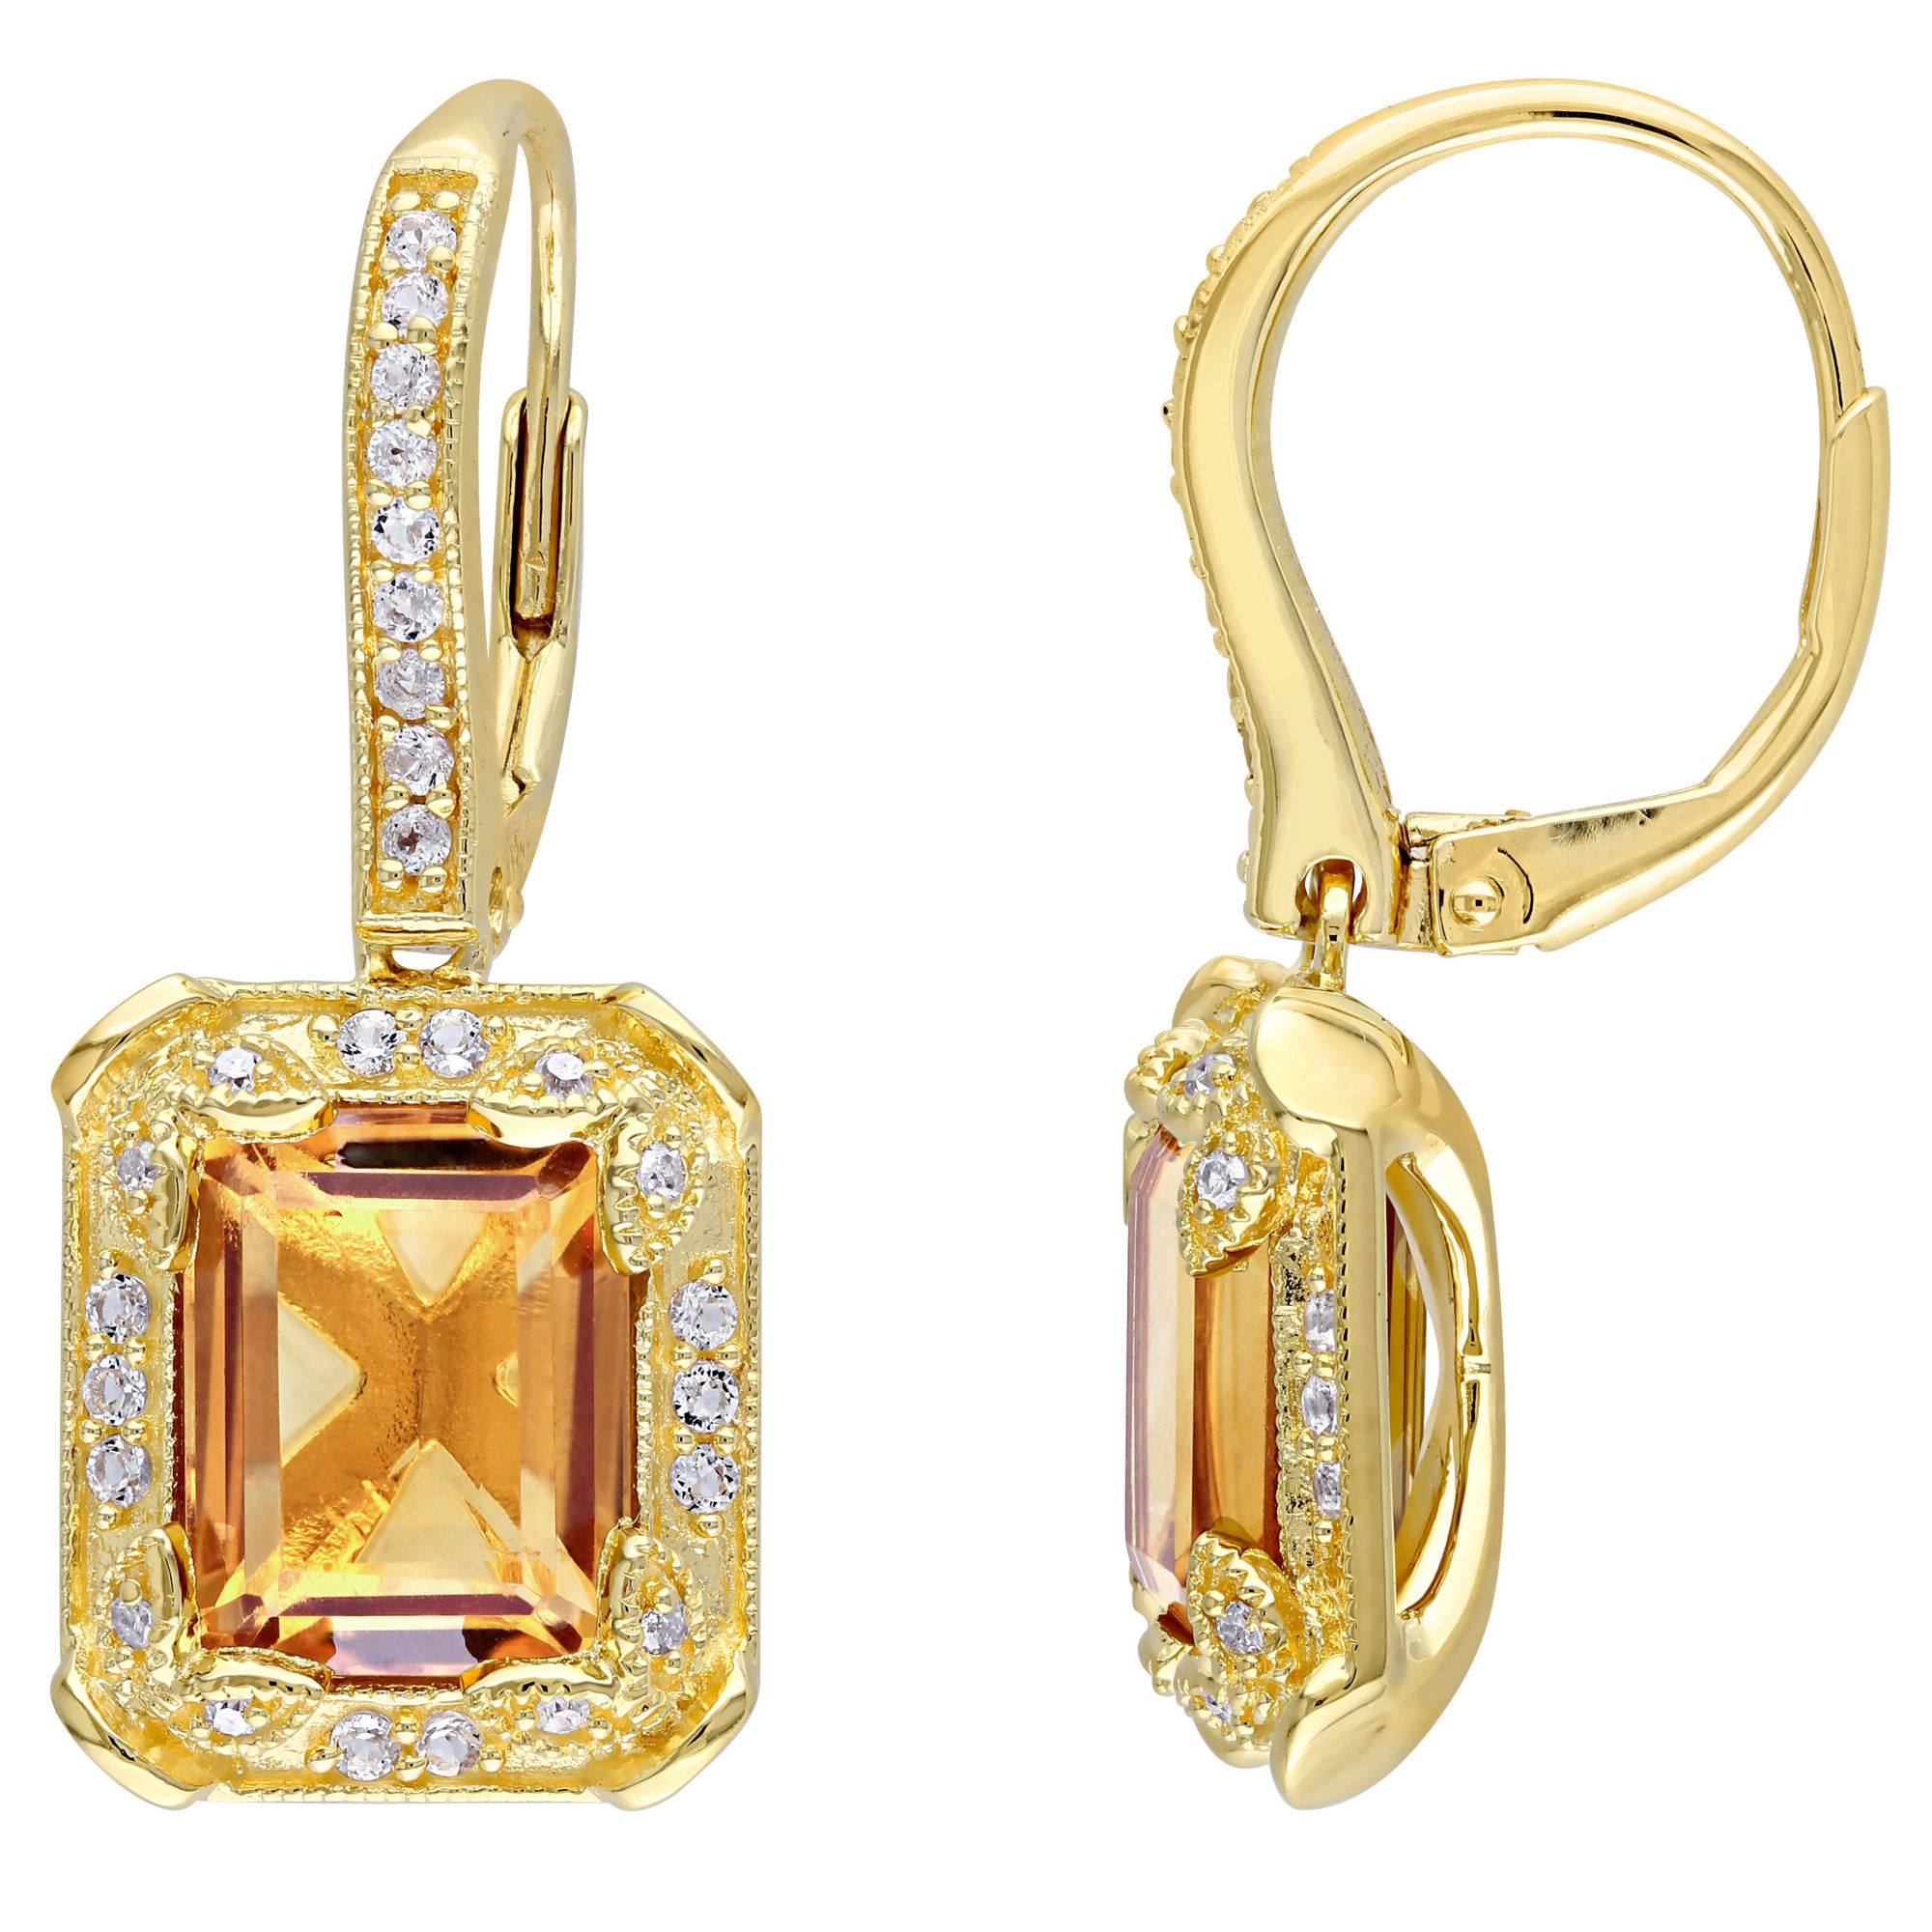 6.6 ct. t.g.w. Citrine, White Topaz and .1 ct. t.w. Diamond Leverback Earrings in Yellow Plated Sterling Silver